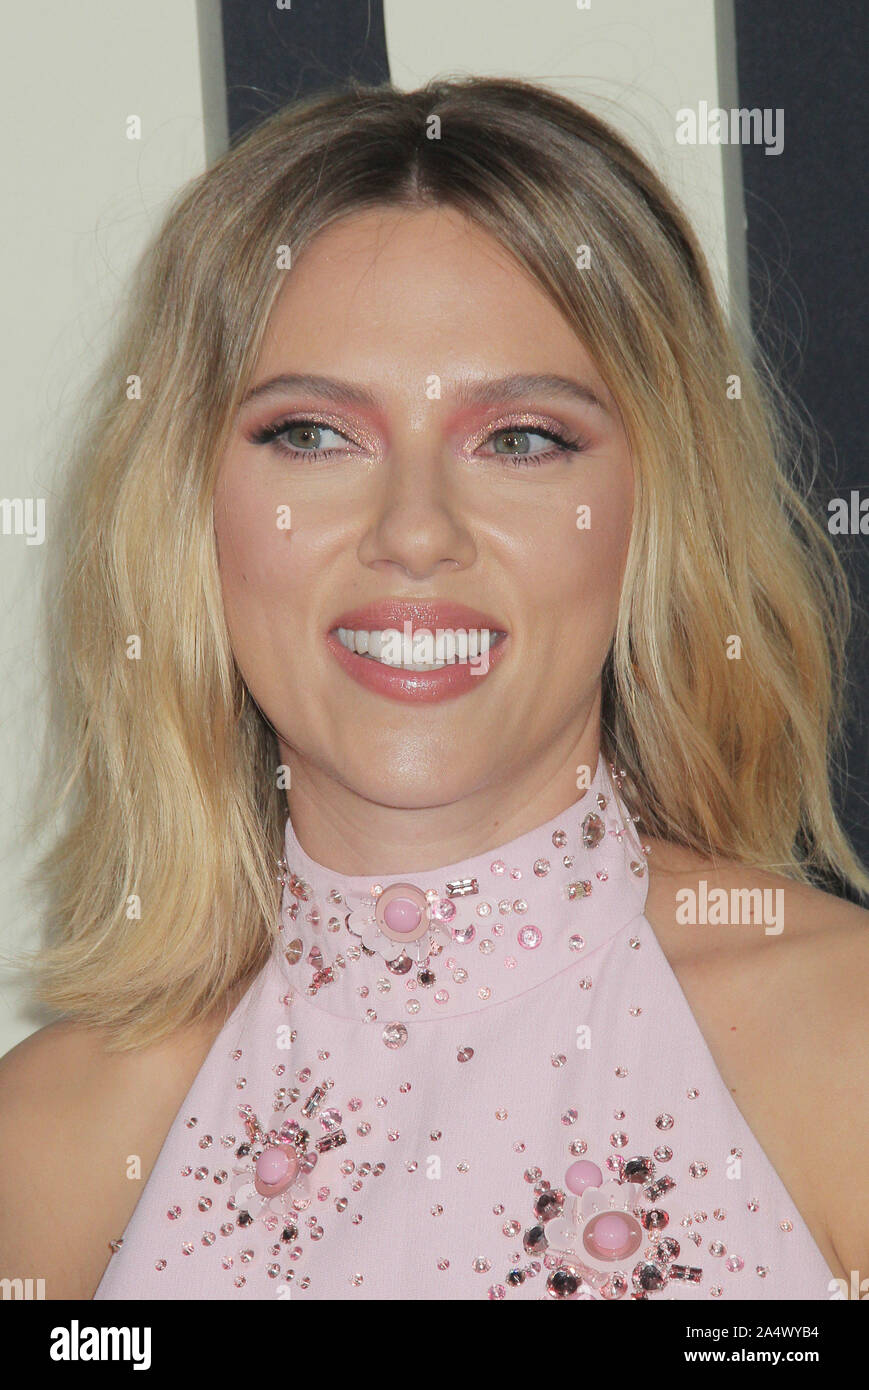 Scarlett Johansson  10/15/2019 The Los Angeles Premiere of 'Jojo Rabbit' held at the Hollywood American Legion Post 43 in Los Angeles, CA. Photo by I. Hasegawa / HNW/ PictureLux Stock Photo